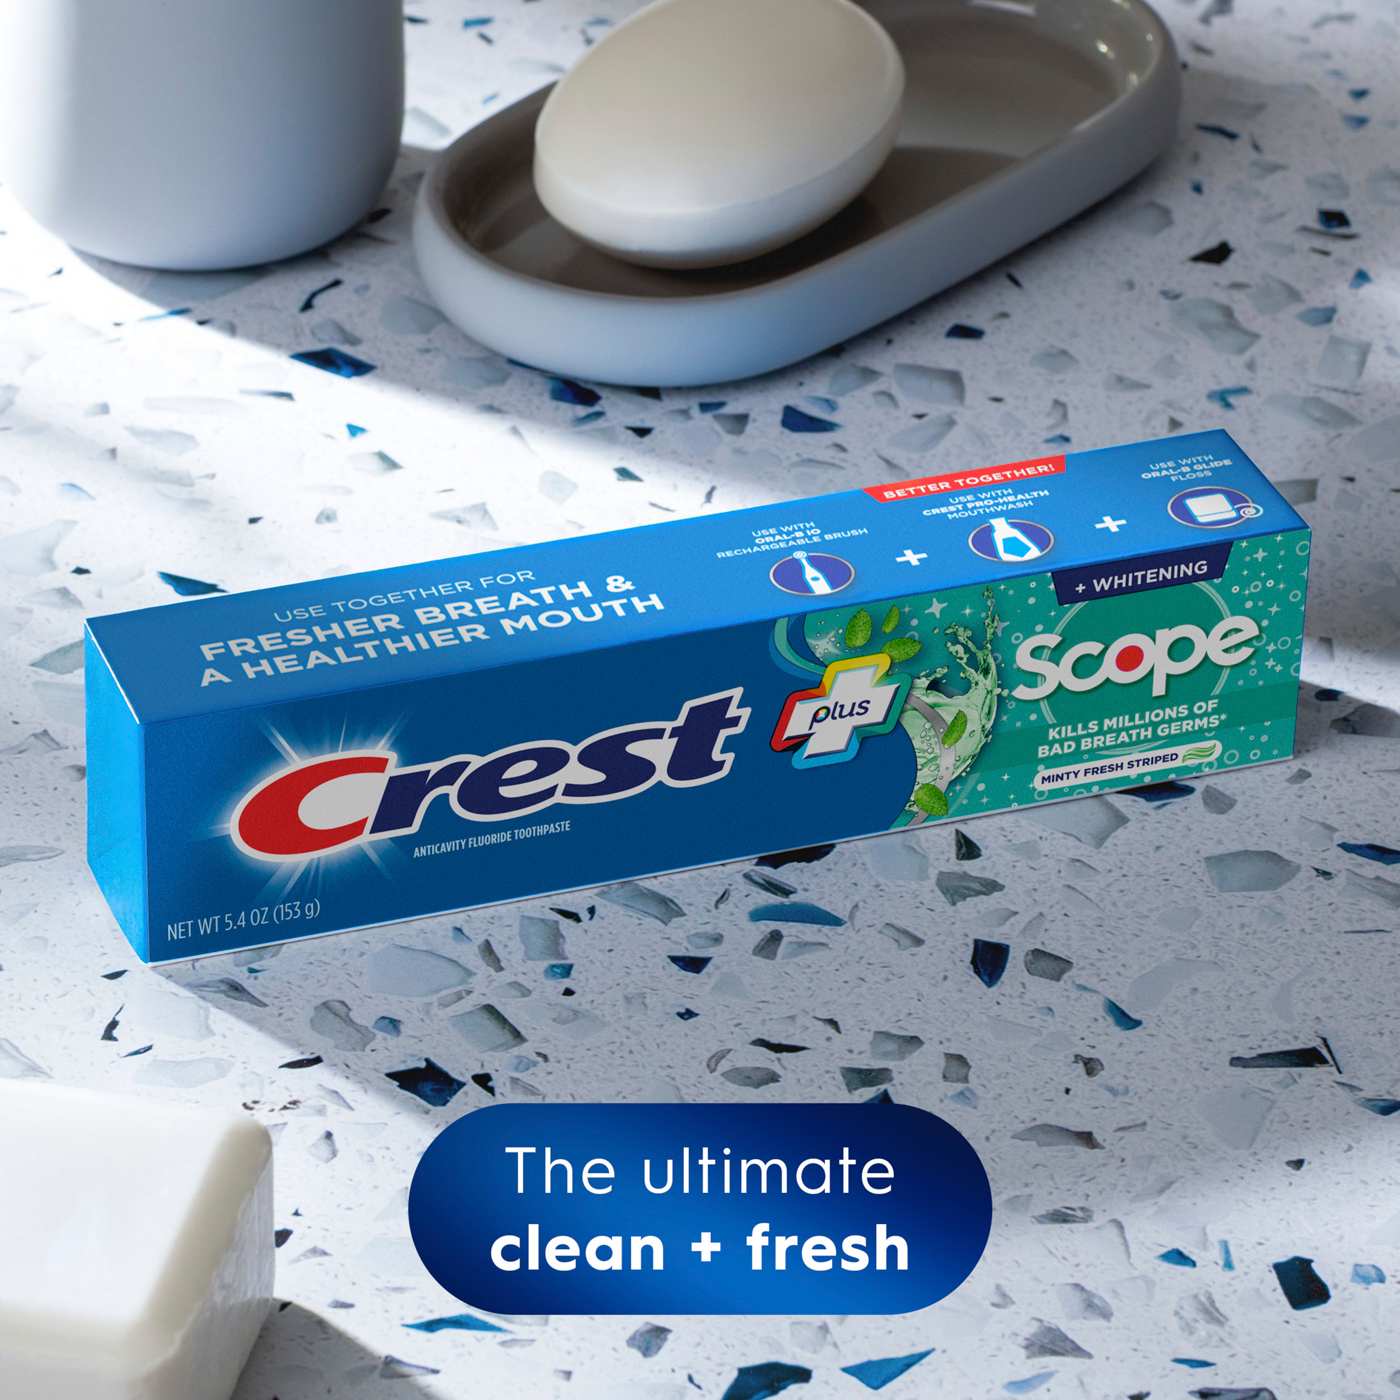 Crest Complete + Scope Whitening Toothpaste - Minty Fresh Striped, 2 Pk; image 8 of 8